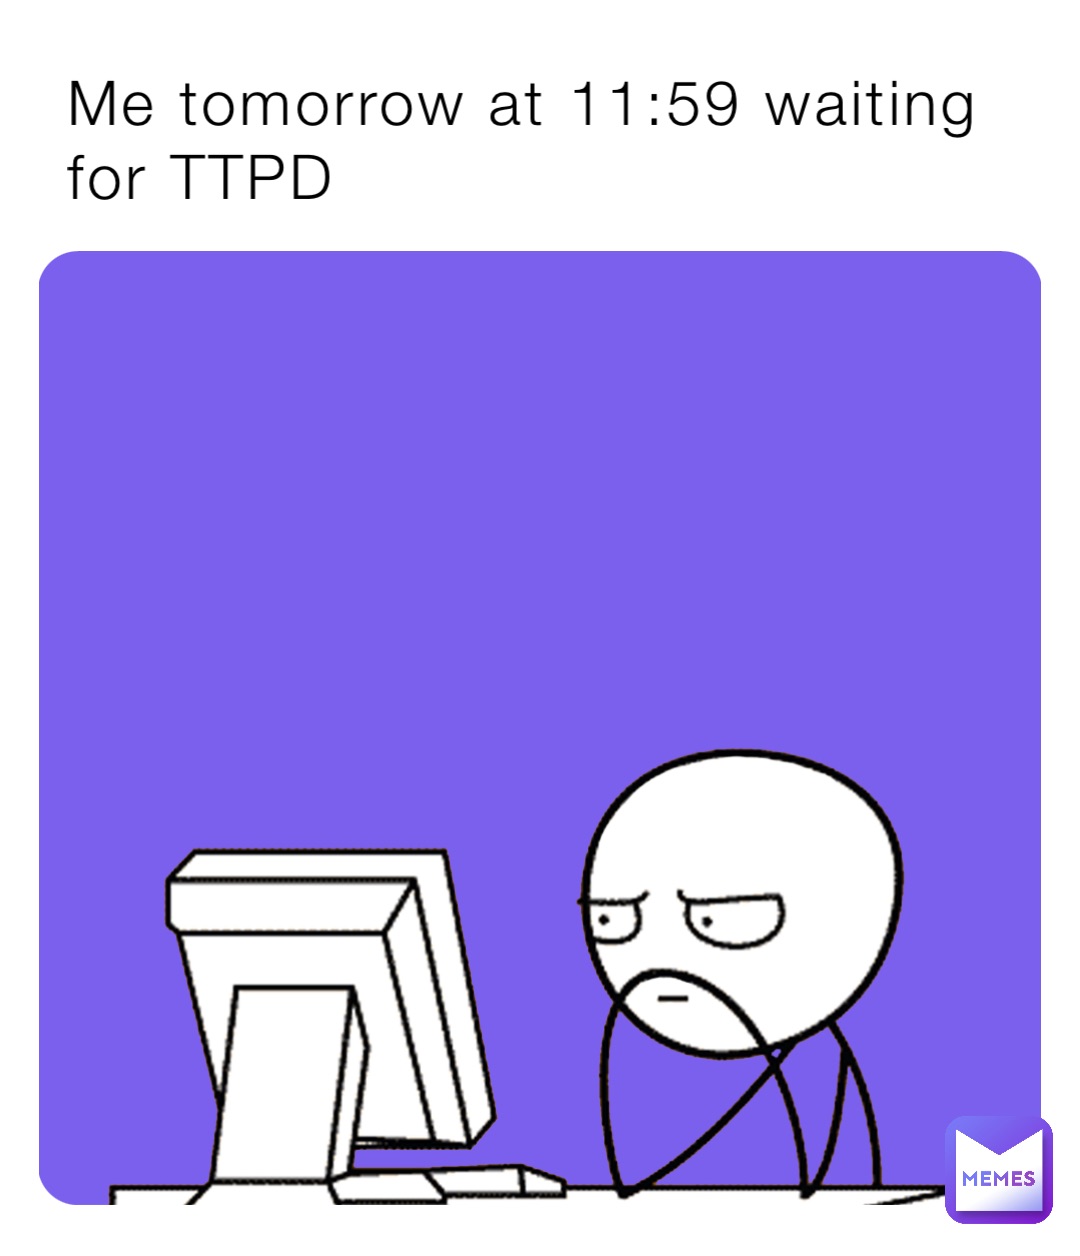 Me tomorrow at 11:59 waiting for TTPD